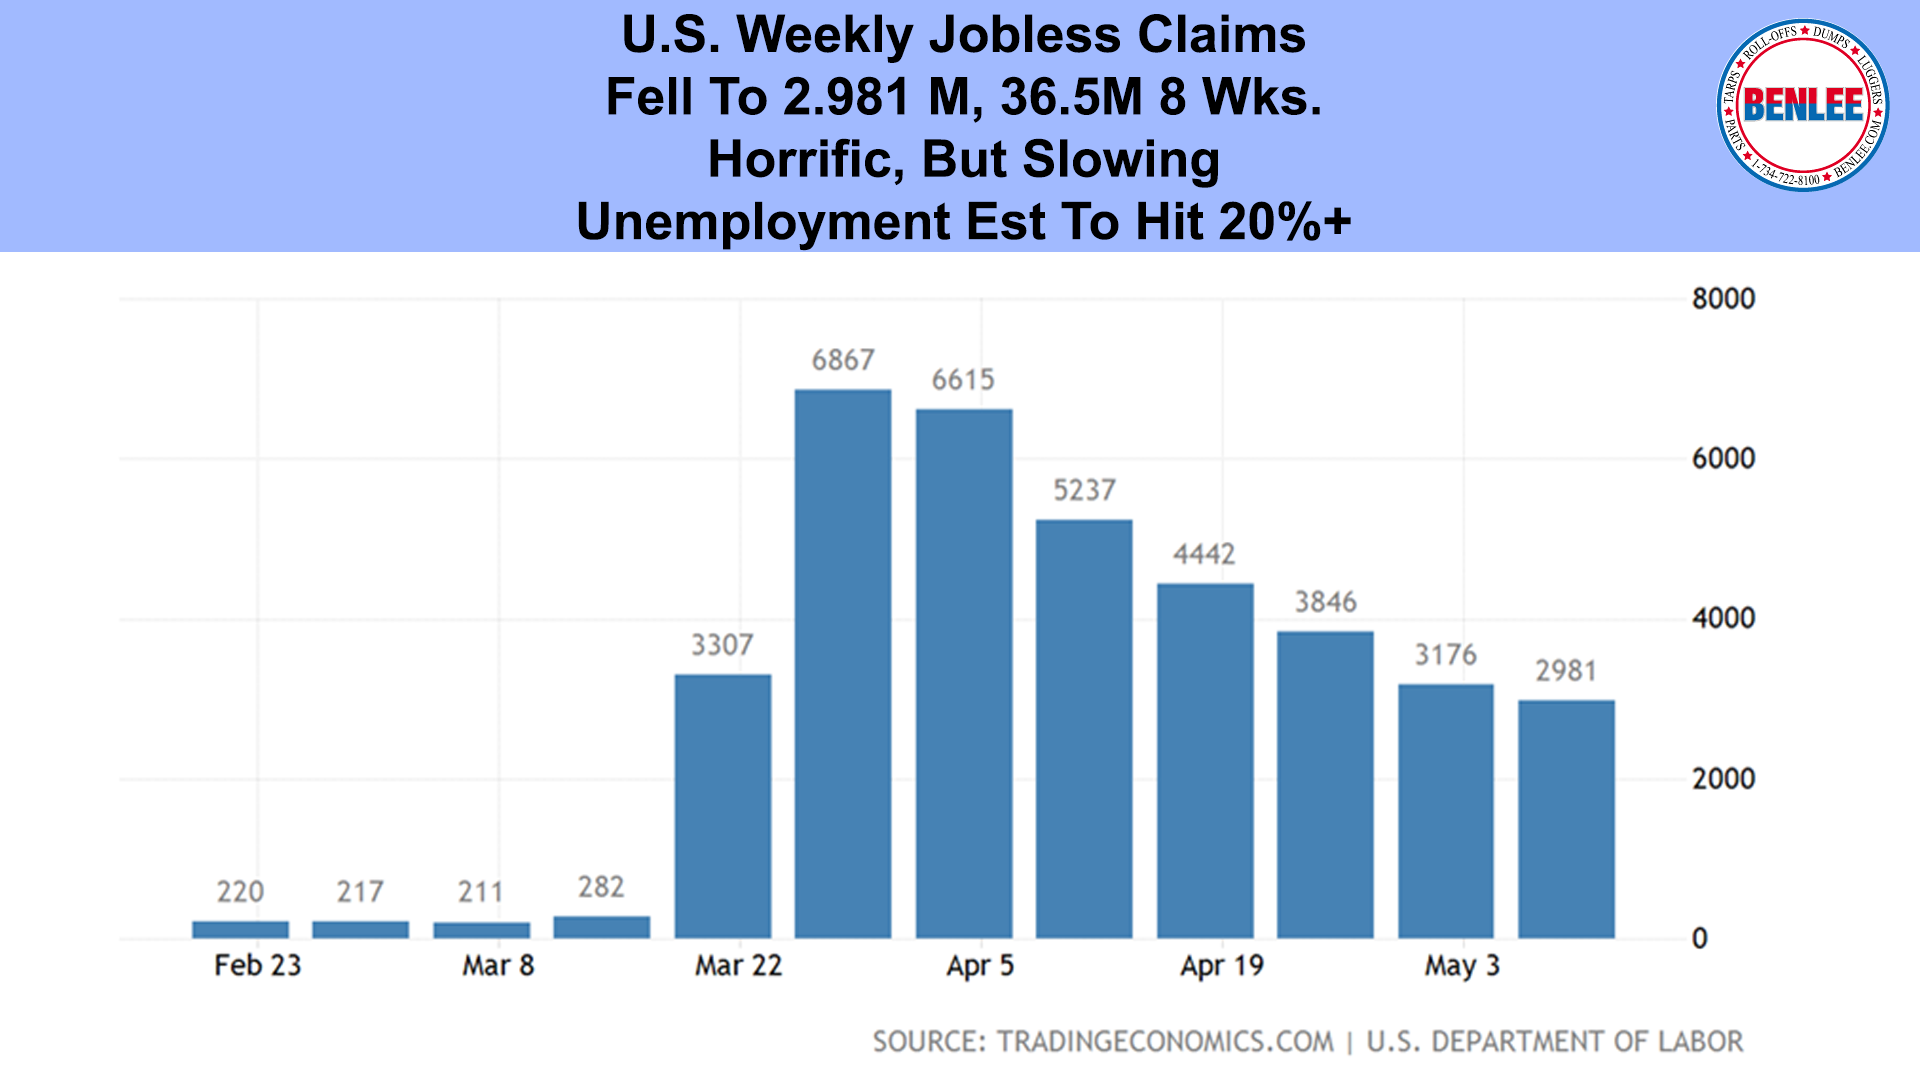 U.S. Weekly Jobless Claims